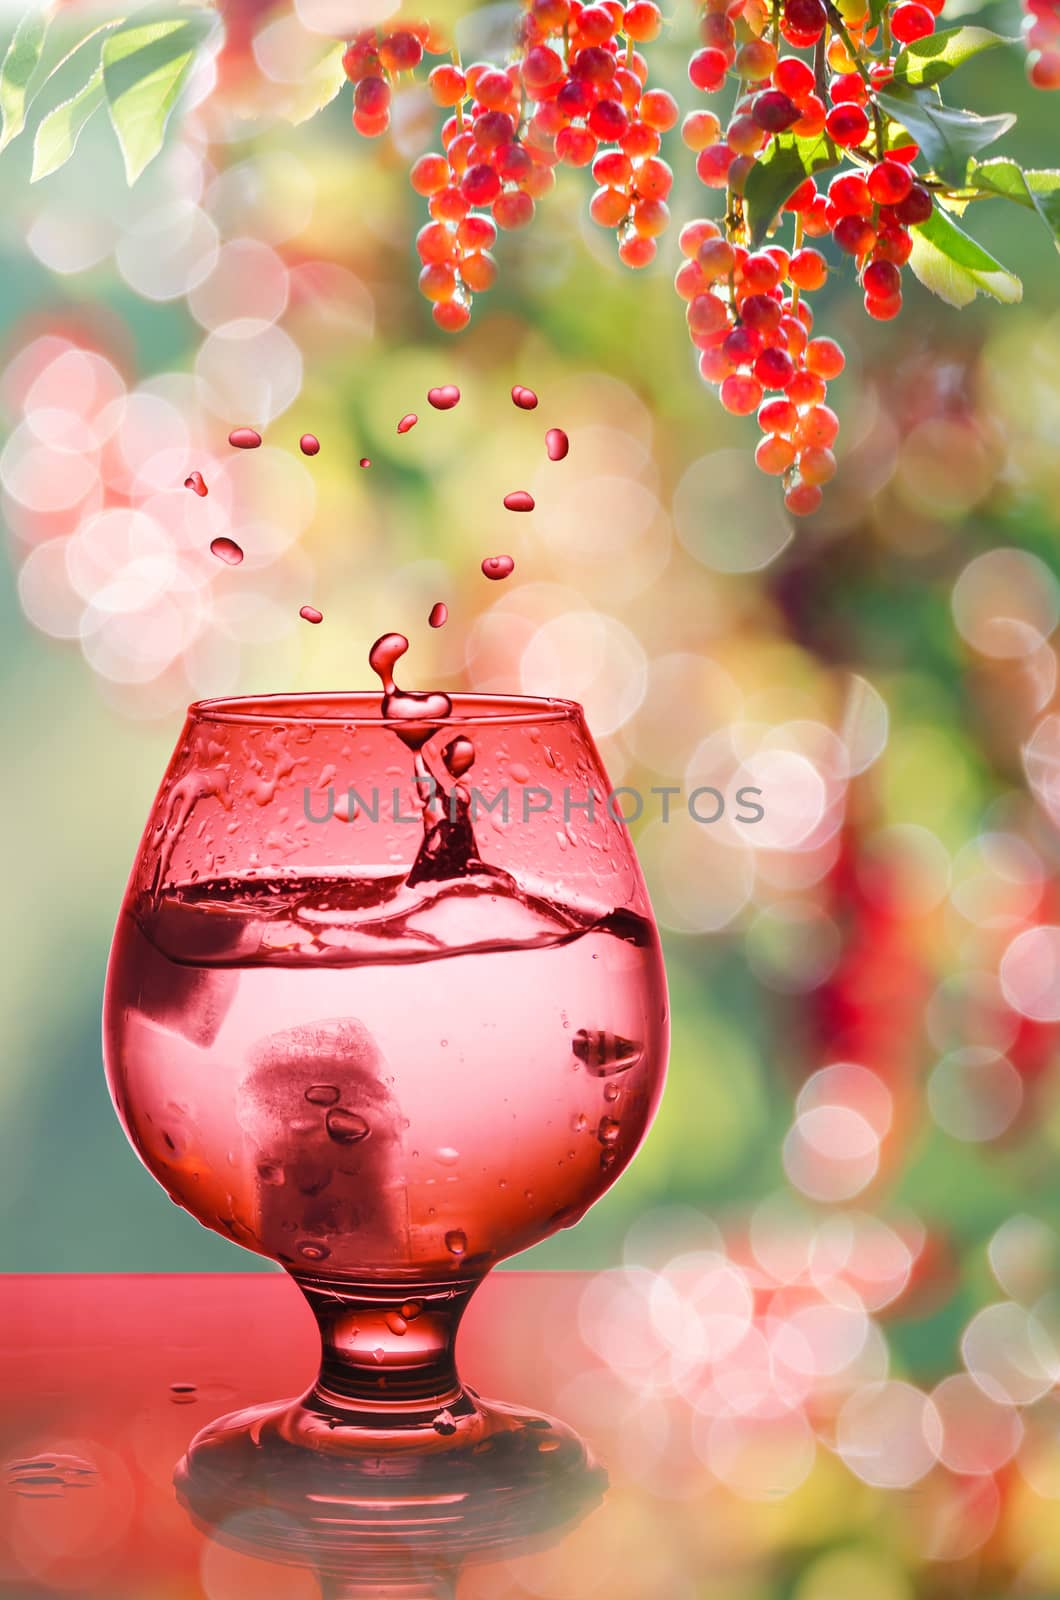 Cocktail glass with ice and drops in the heart, painted red. Background with natural bokeh with sunlight and berries.